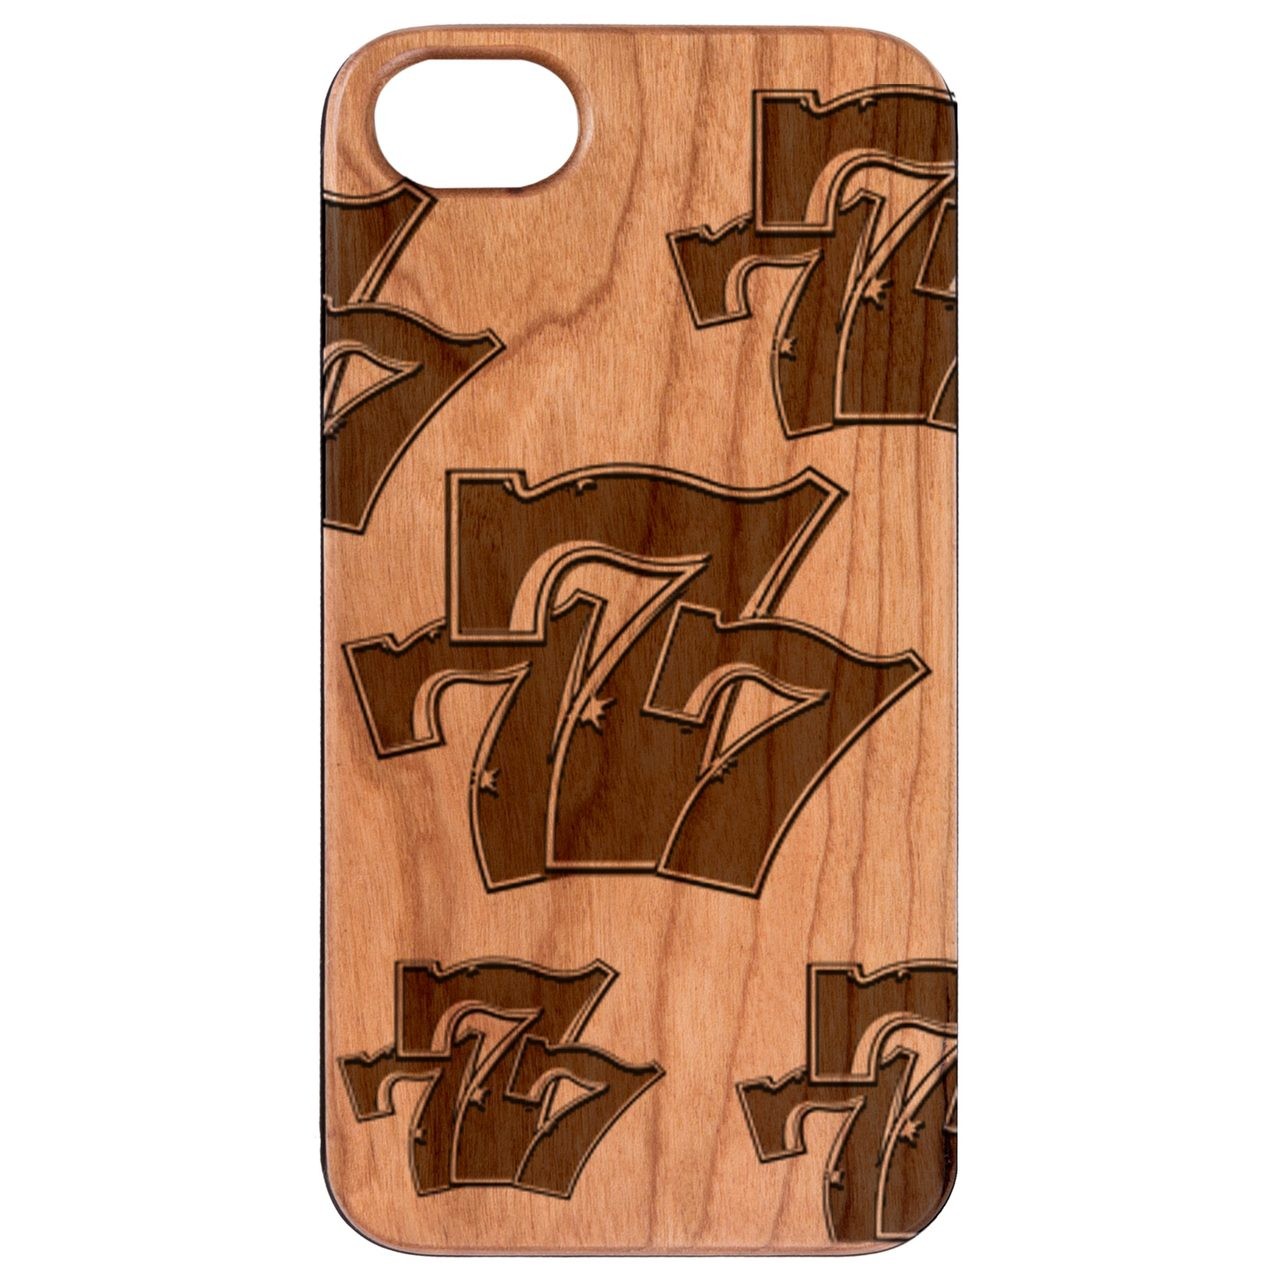  Lucky Seven - Engraved - Wooden Phone Case - IPhone 13 Models